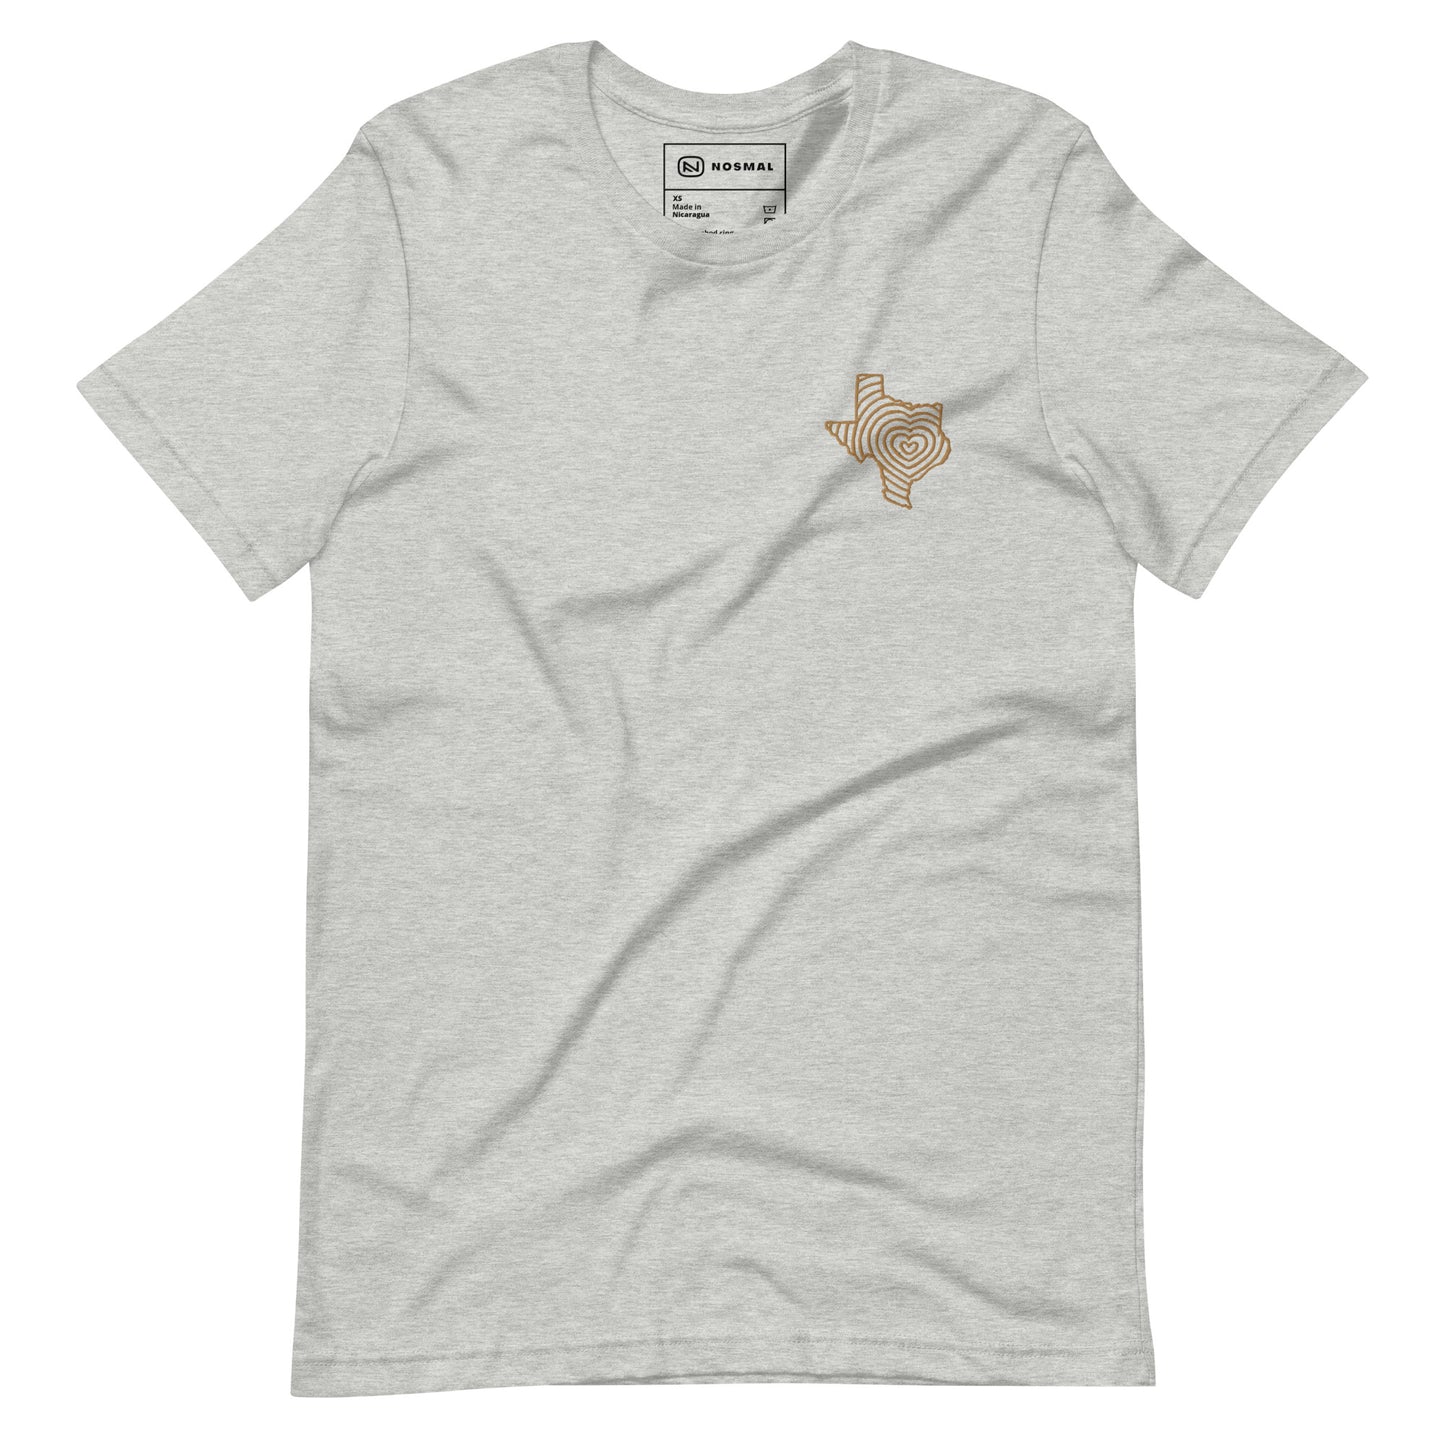 Straight on view of heartbeat of texas gold embroidered design on heather athletic grey unisex t-shirt.